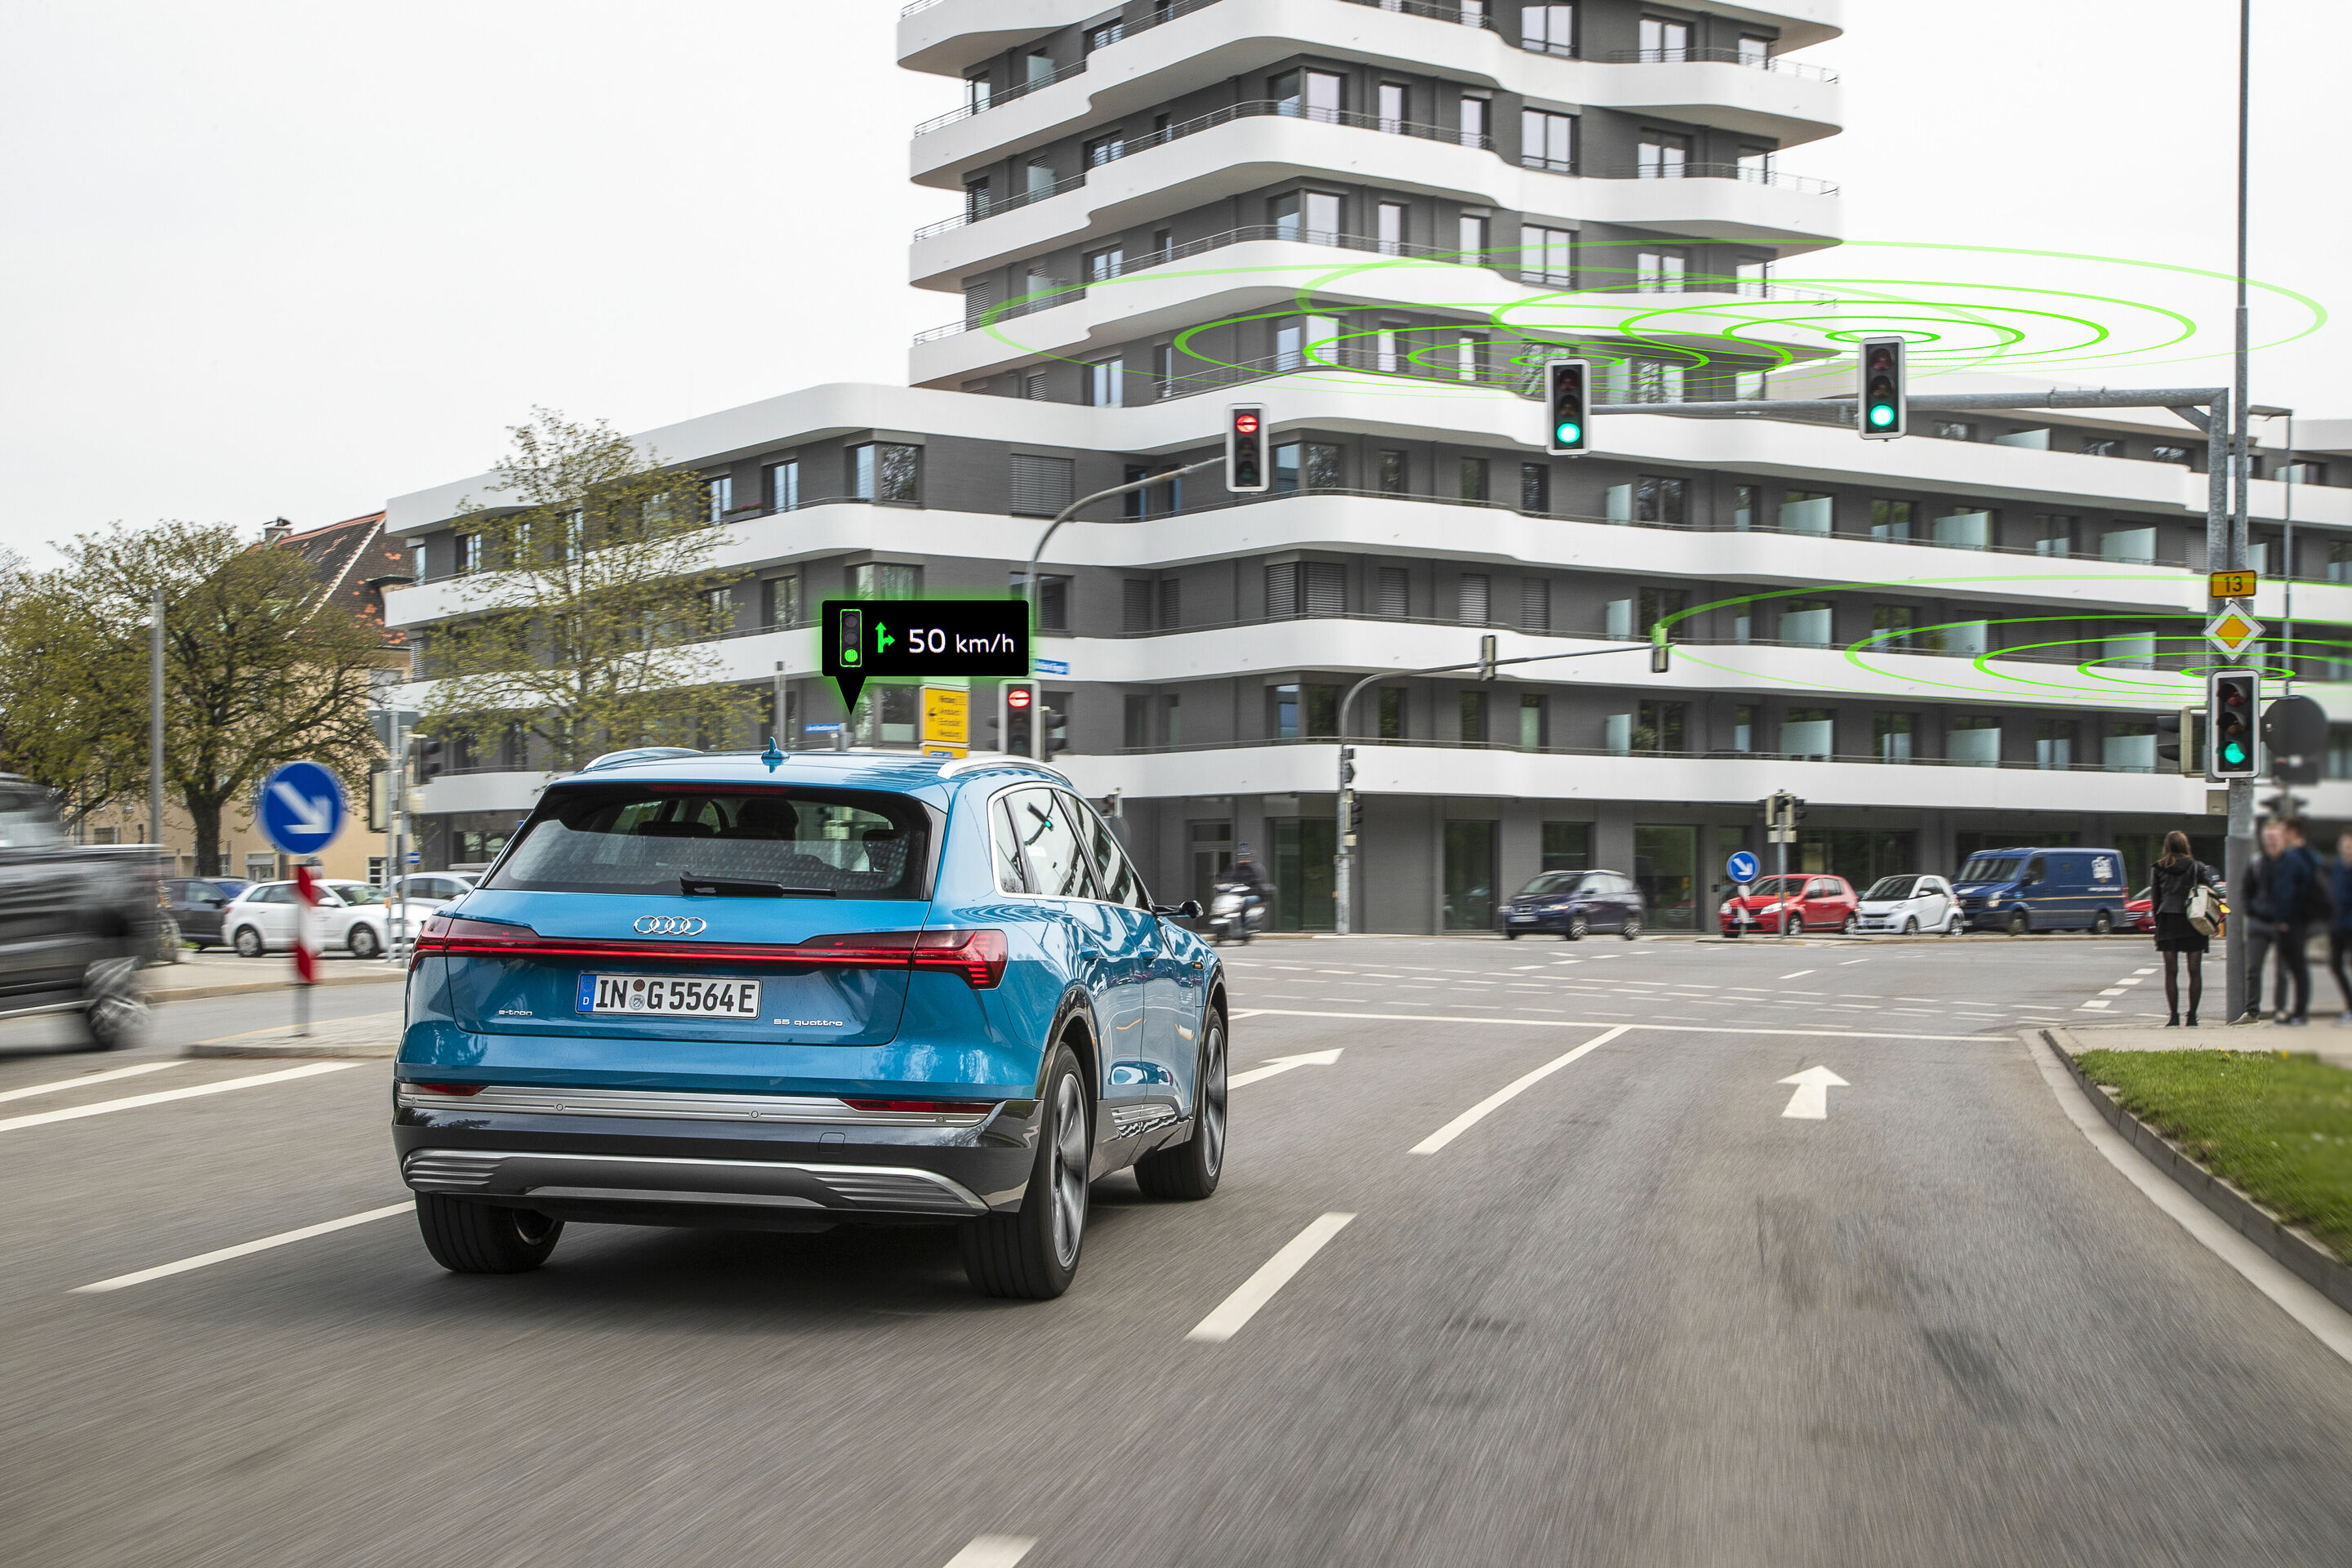 Audi networks with traffic lights in Europe